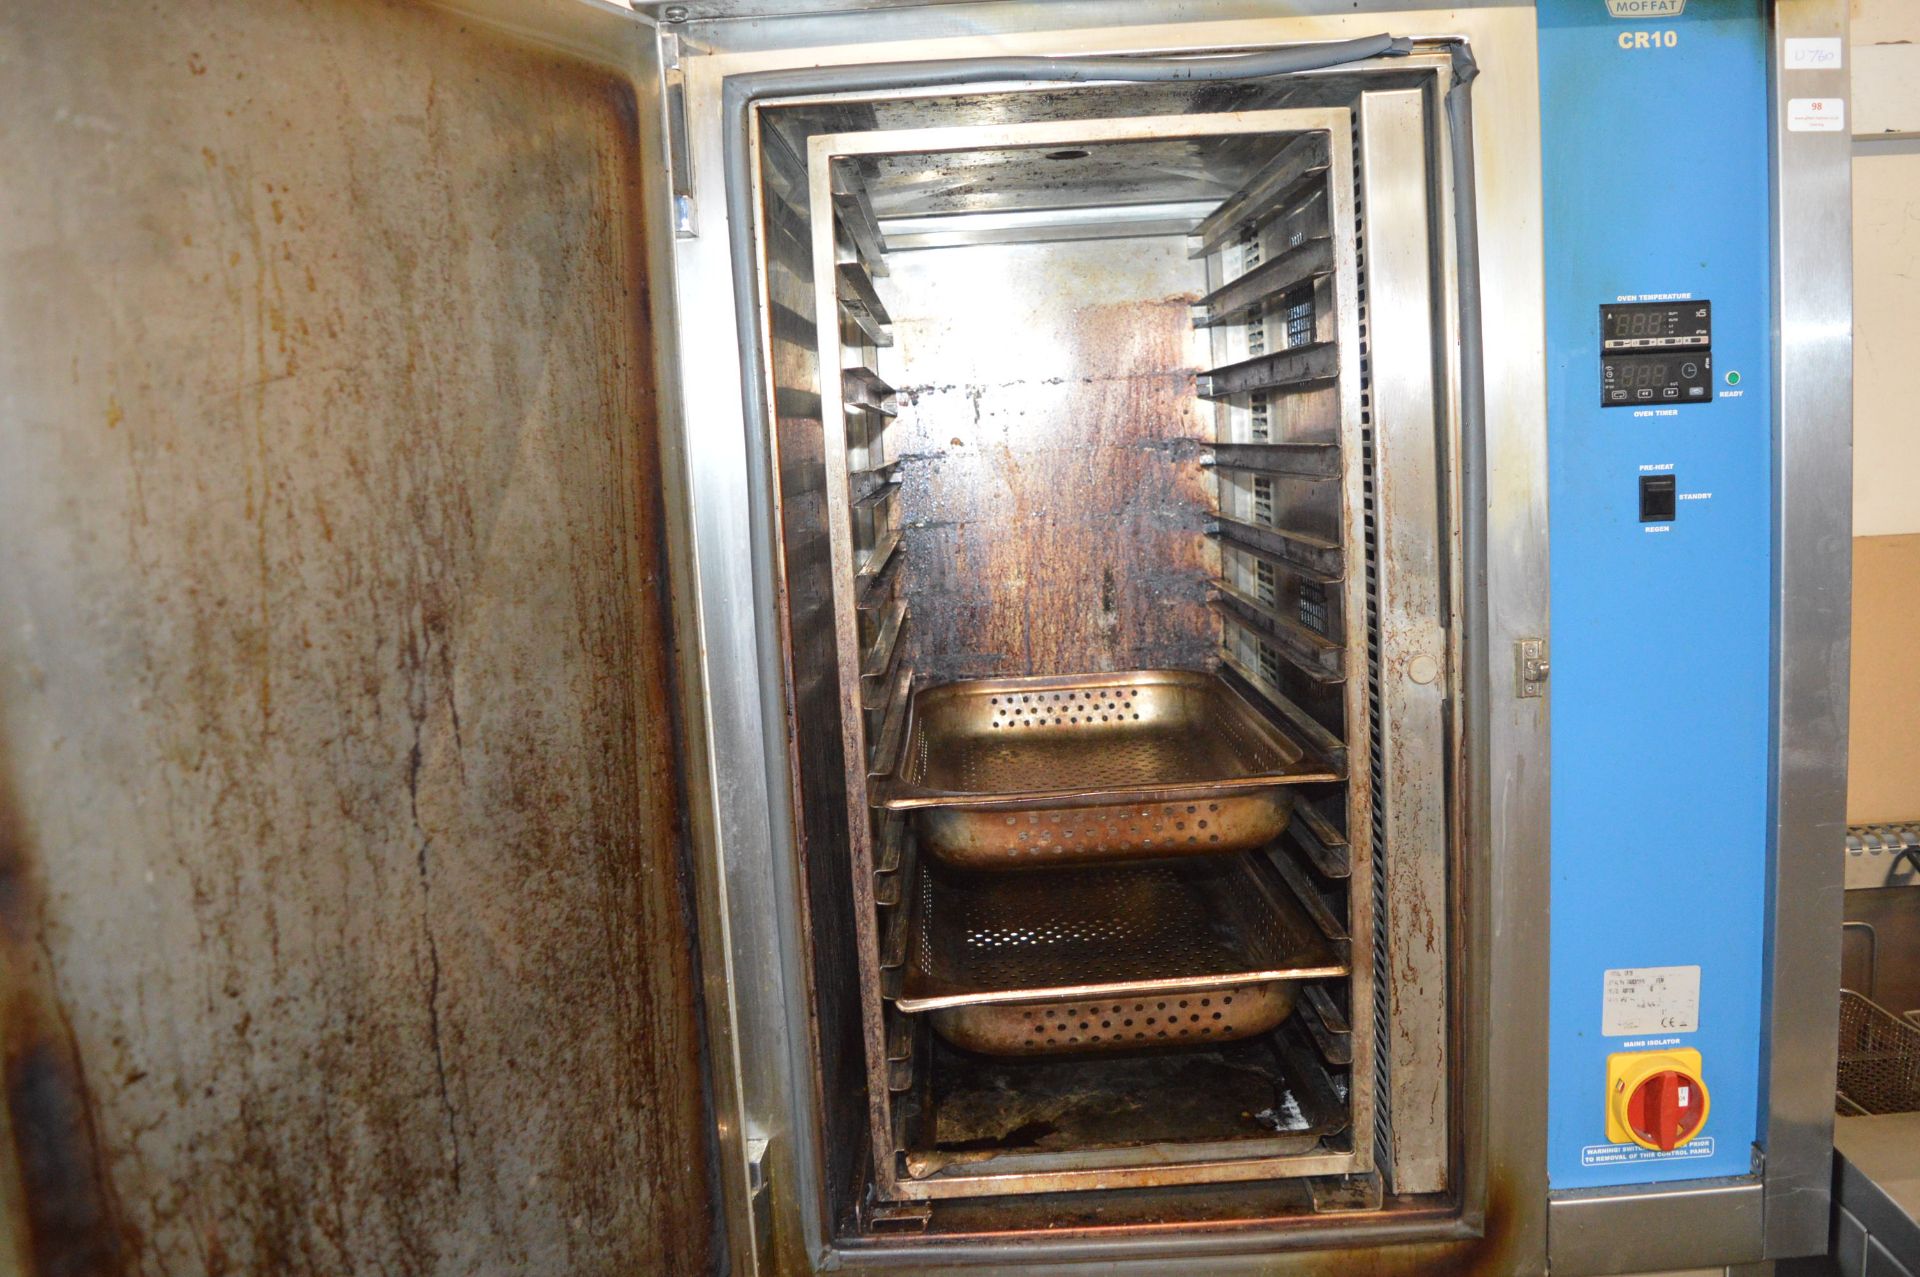 Moffat CR10 Single Phase Oven on Stand - Image 2 of 2